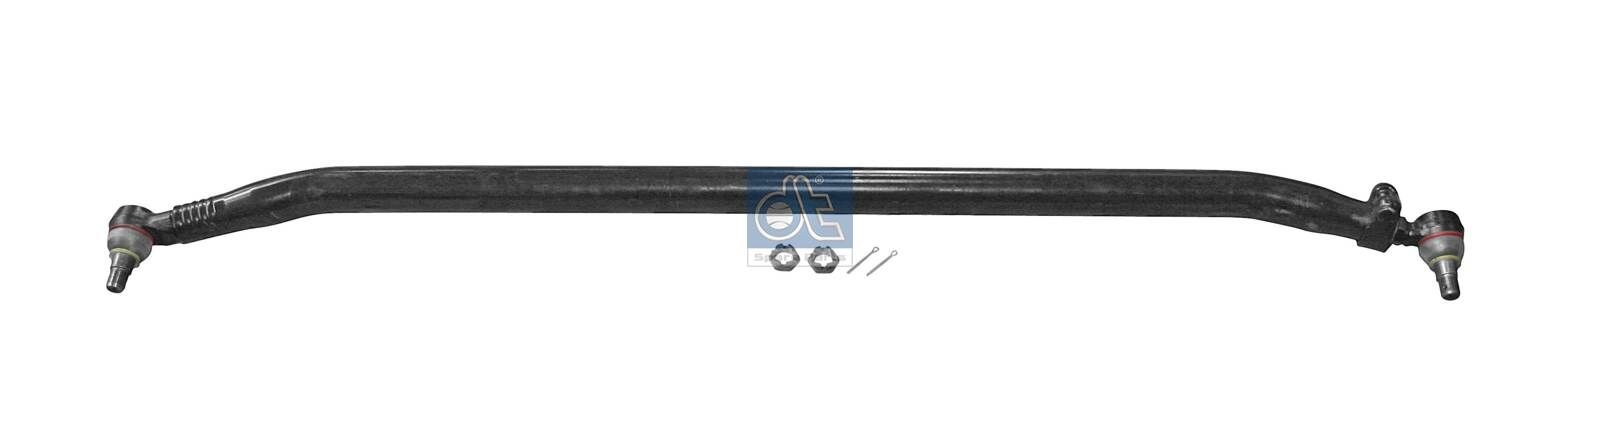 DT Spare Parts 6.53021 Rod Assembly 74 21 560 963